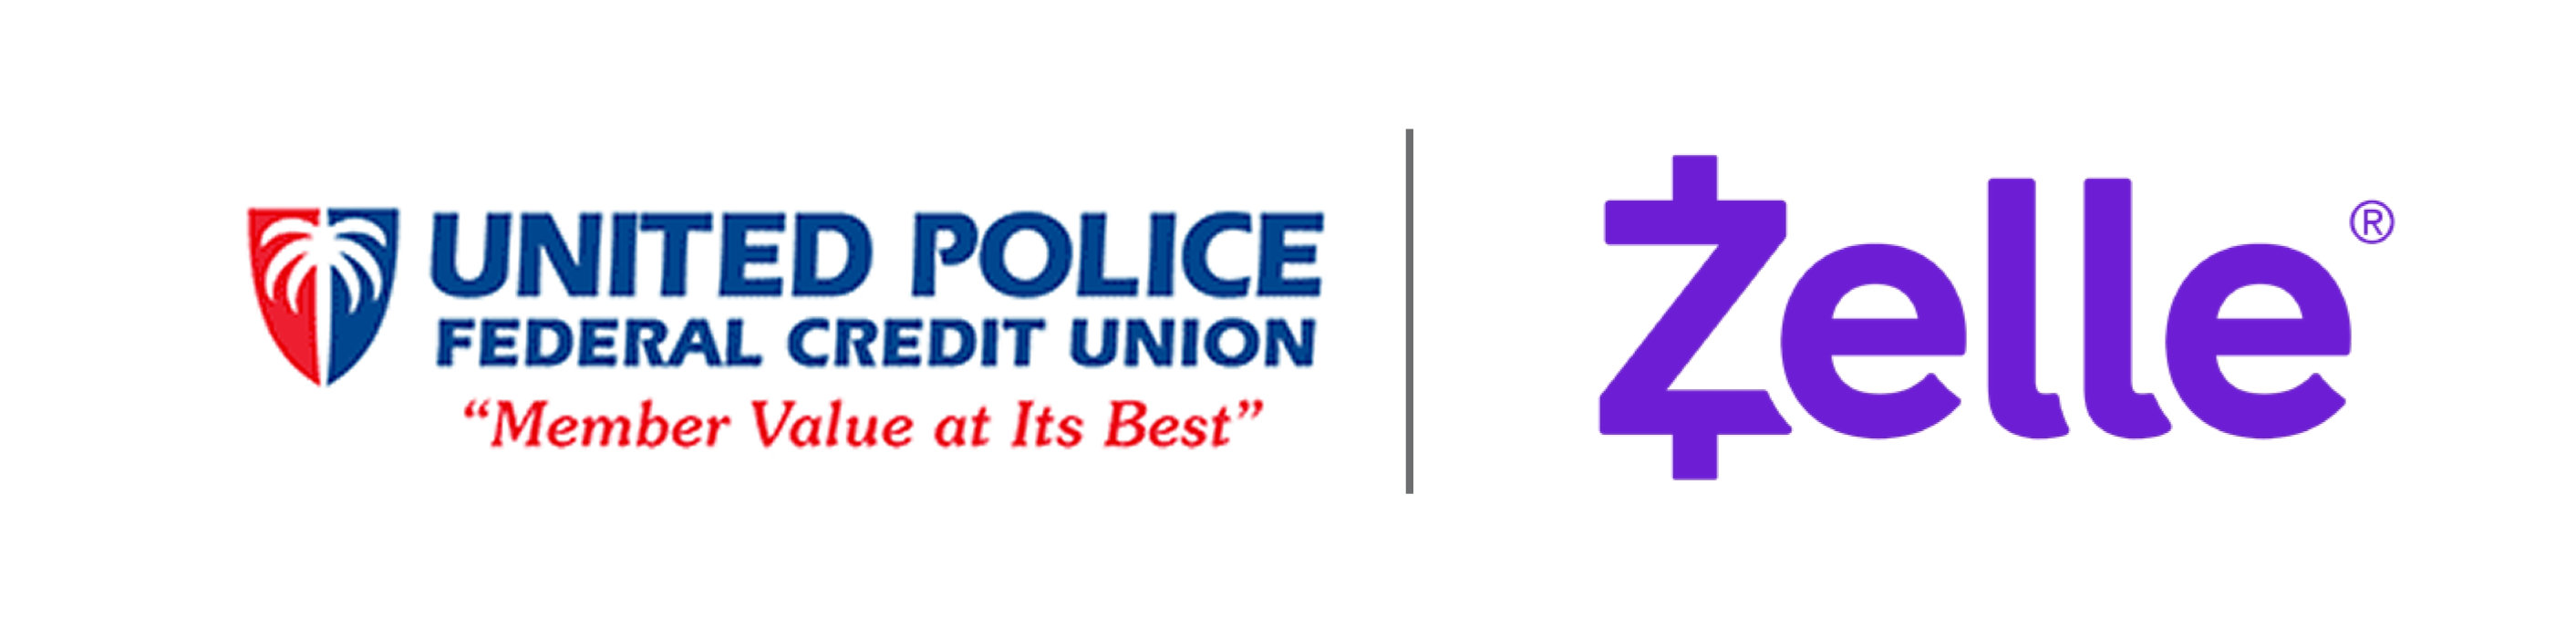 United Police Federal Credit Union